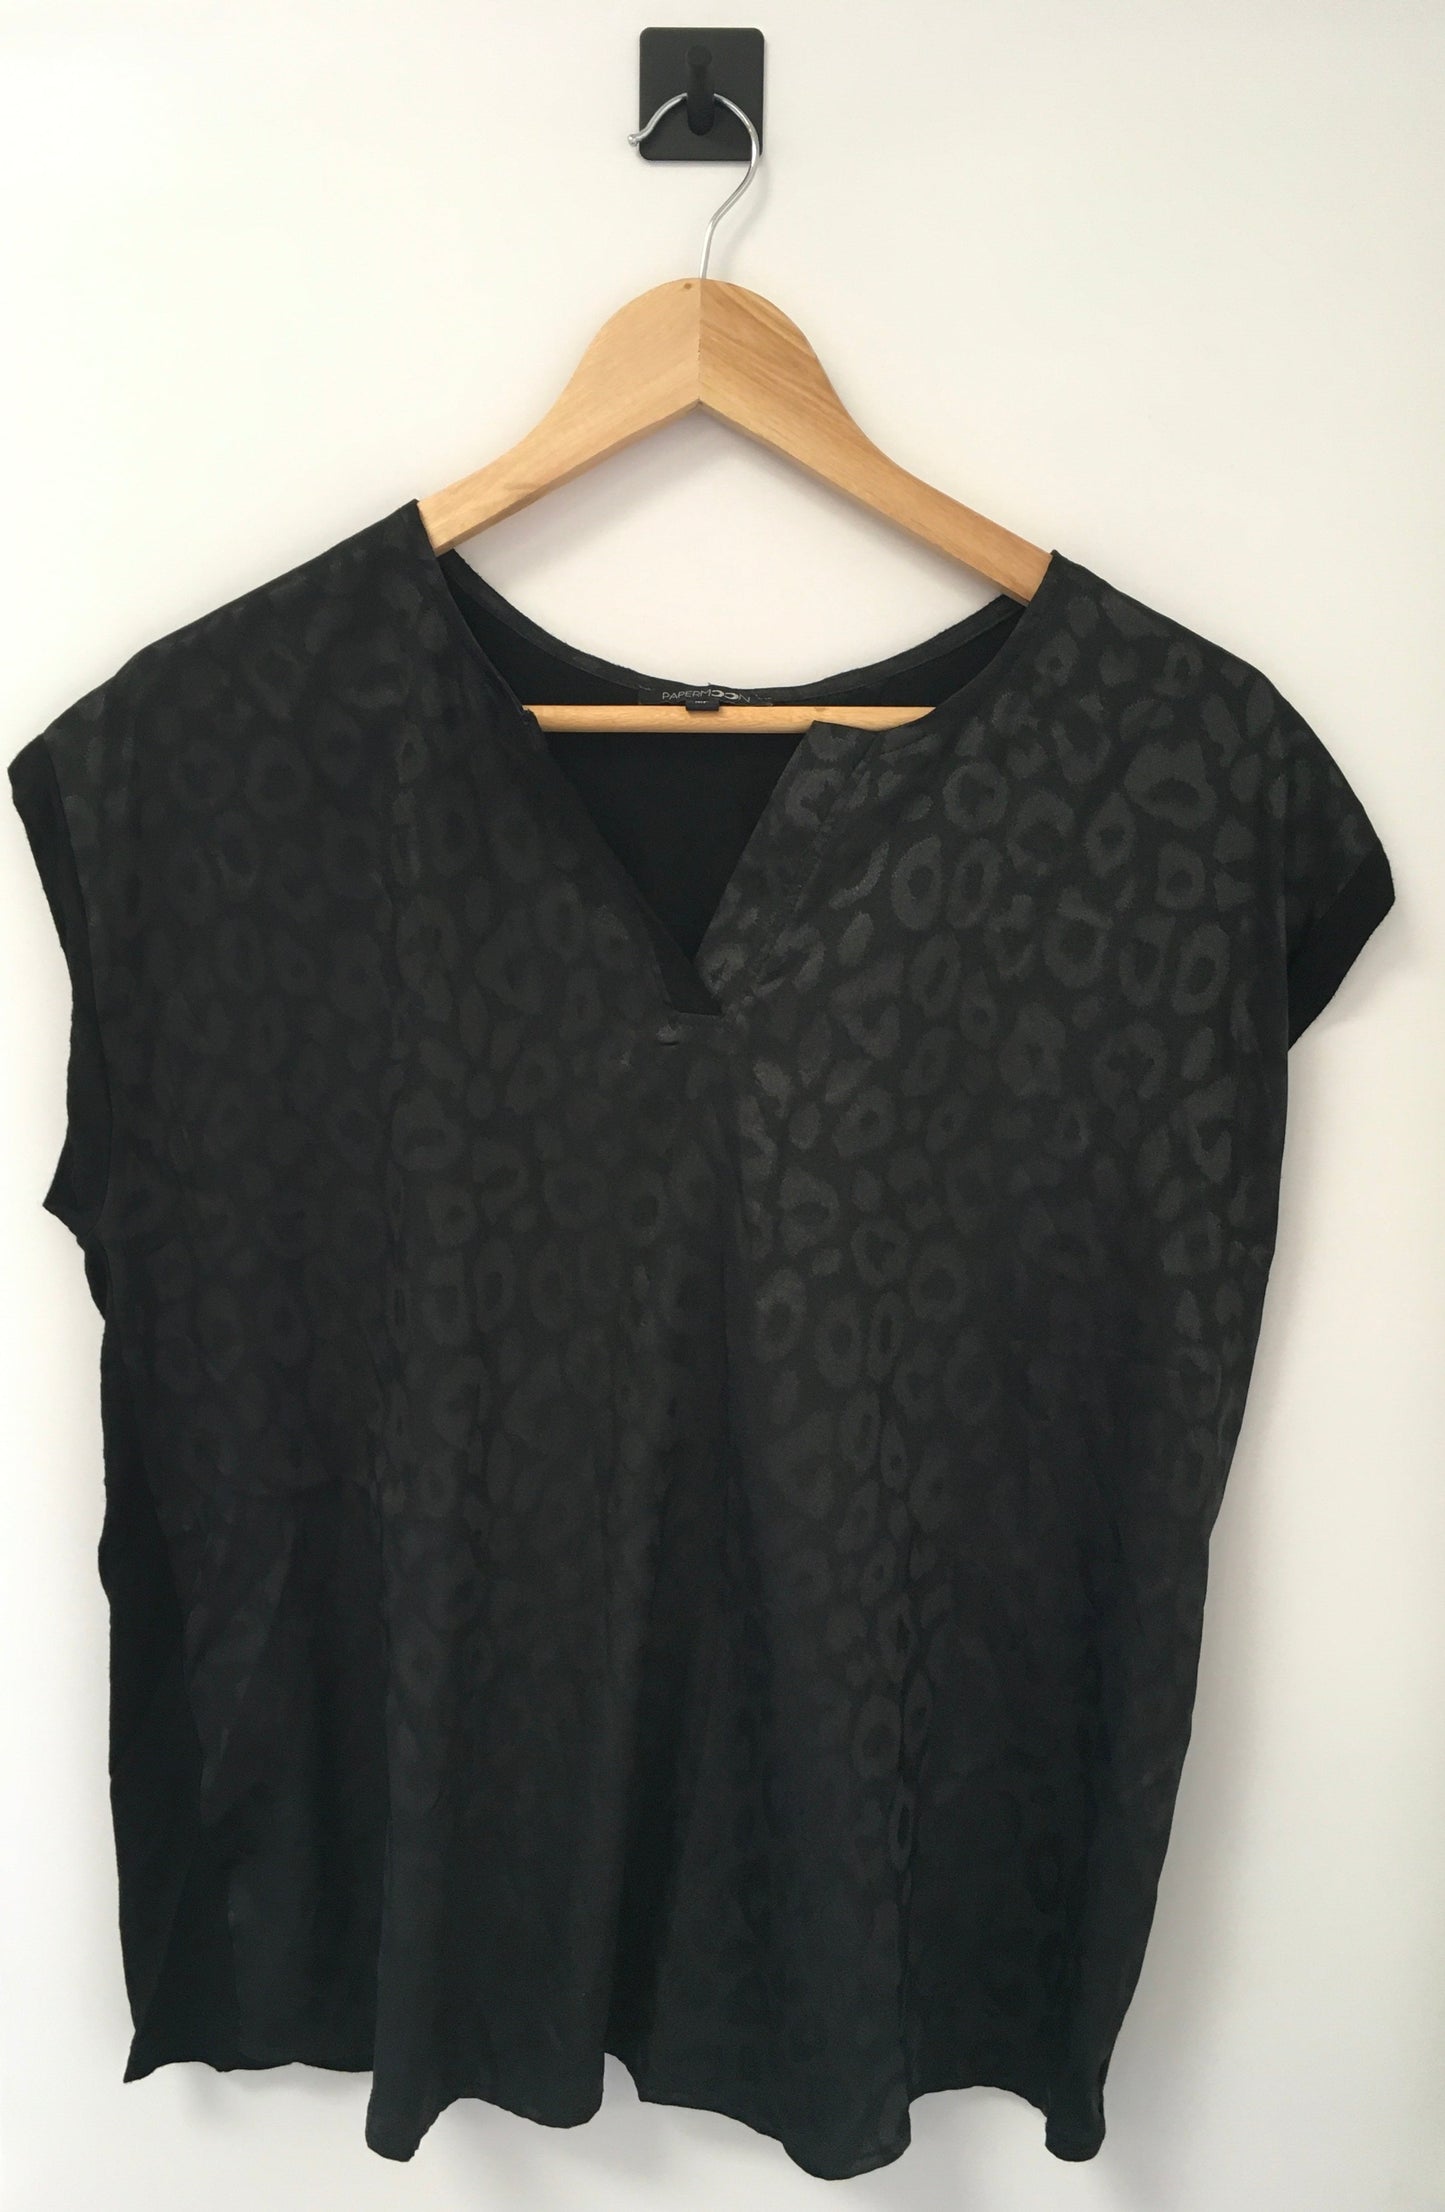 Top Short Sleeve By Papermoon  Size: Petite